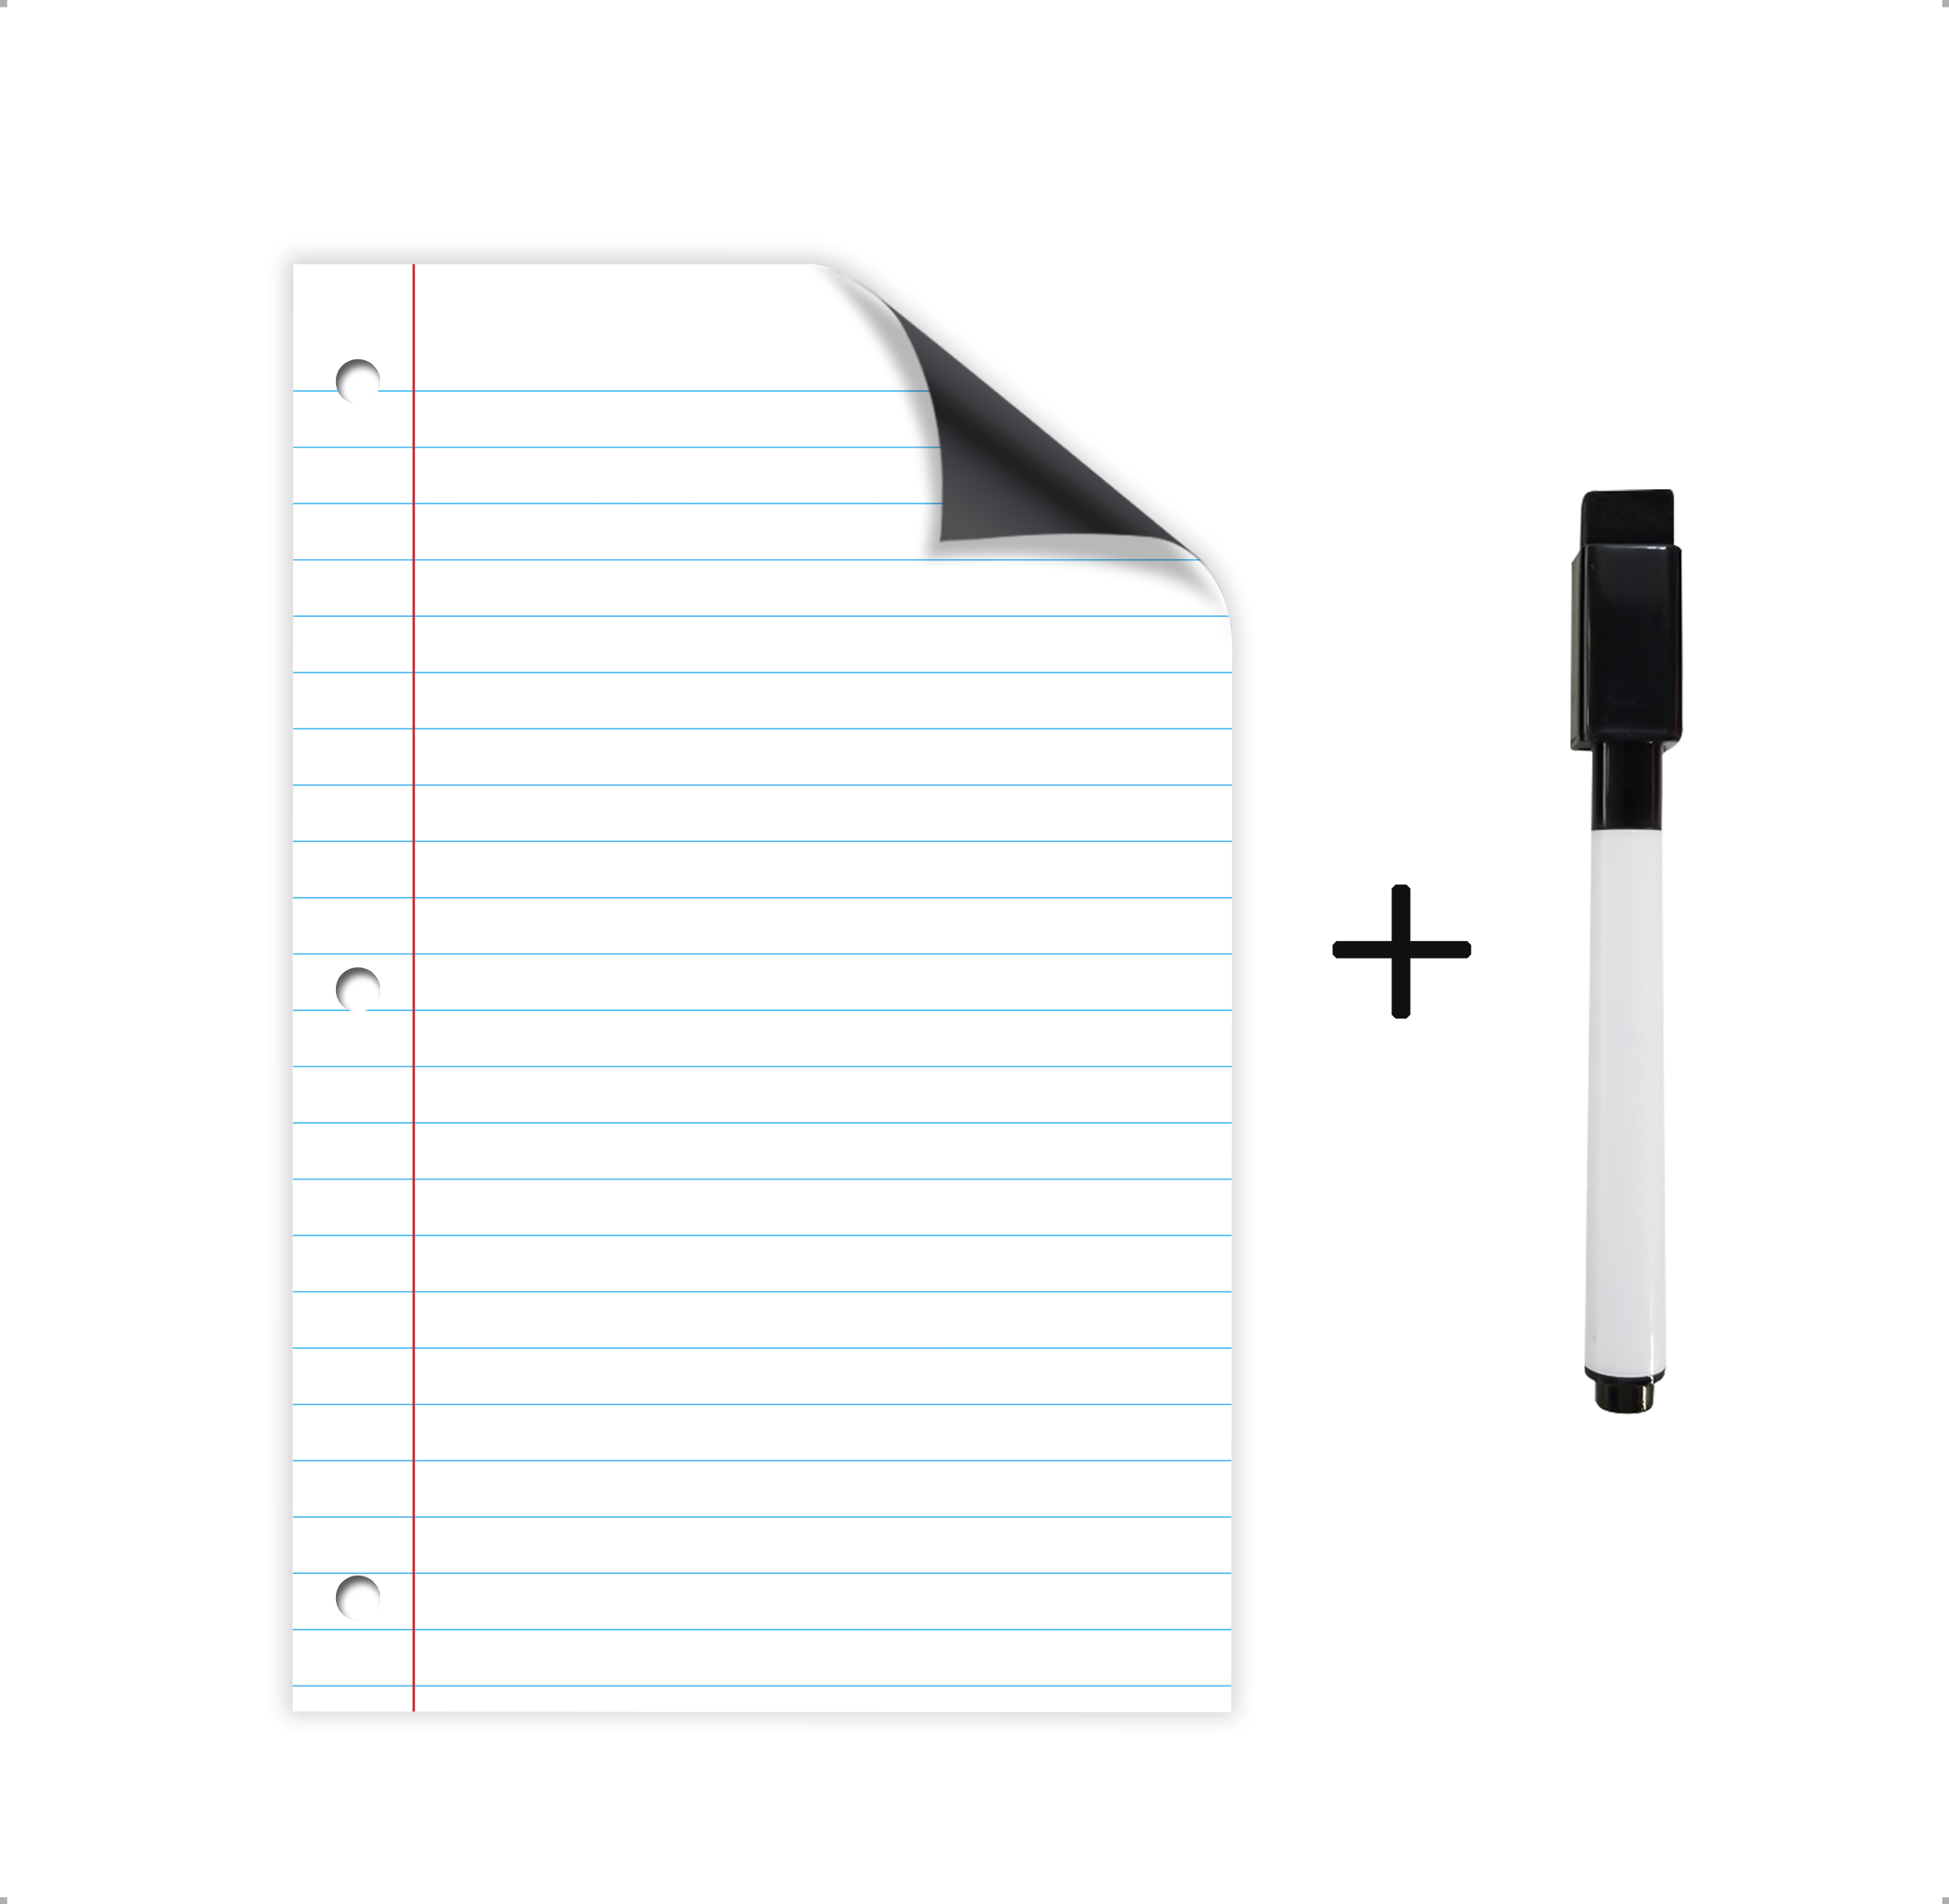 Dry Erase Magnetic sheet - Notebook design. 11x17 inches.